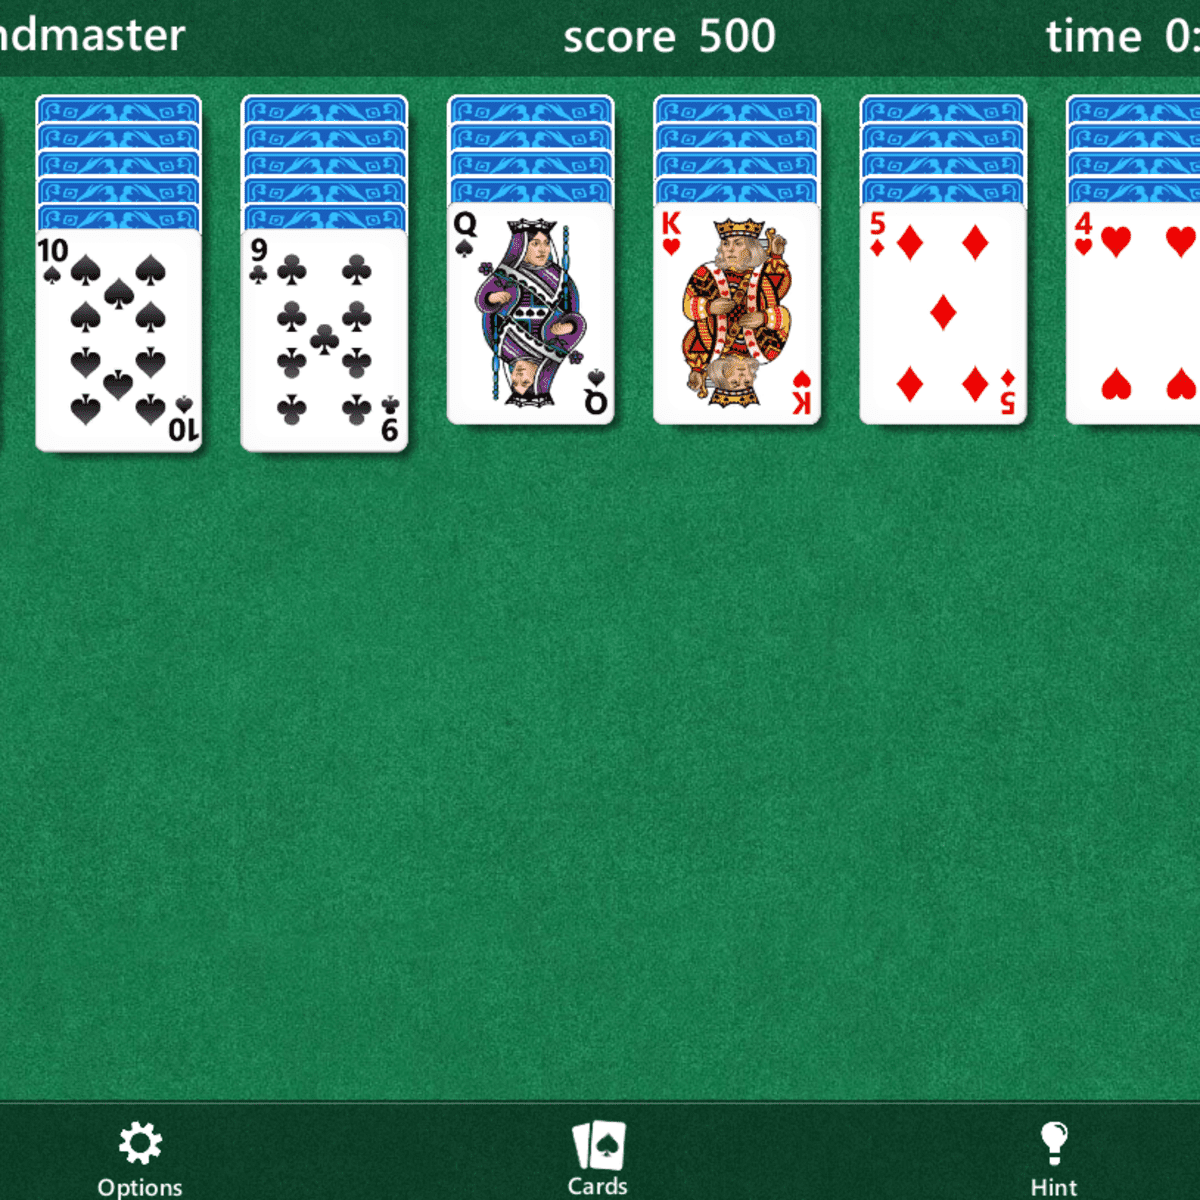 What Are the Odds of Winning a 4 Suit Spider Solitaire Game? What